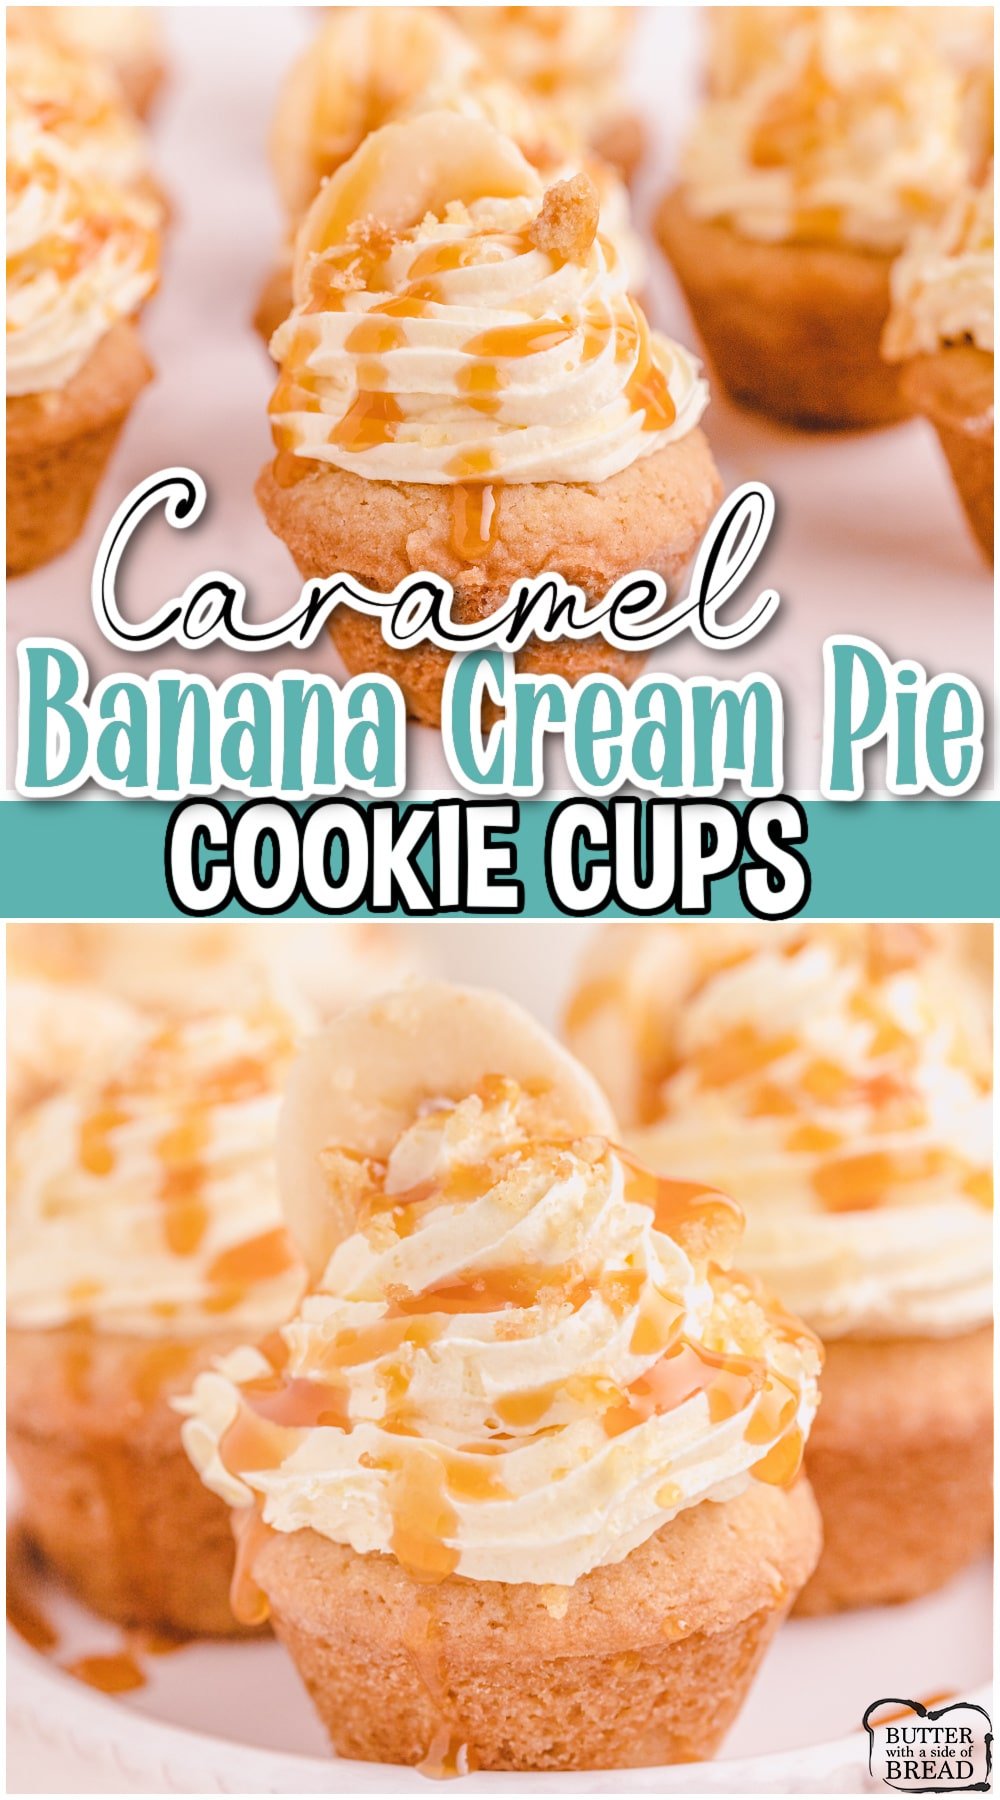 Caramel Banana Cream Pie Cookies are banana cream pie in cookie form! Creamy banana filling with caramel all in a sugar cookie cup for an indulgent treat everyone loves!